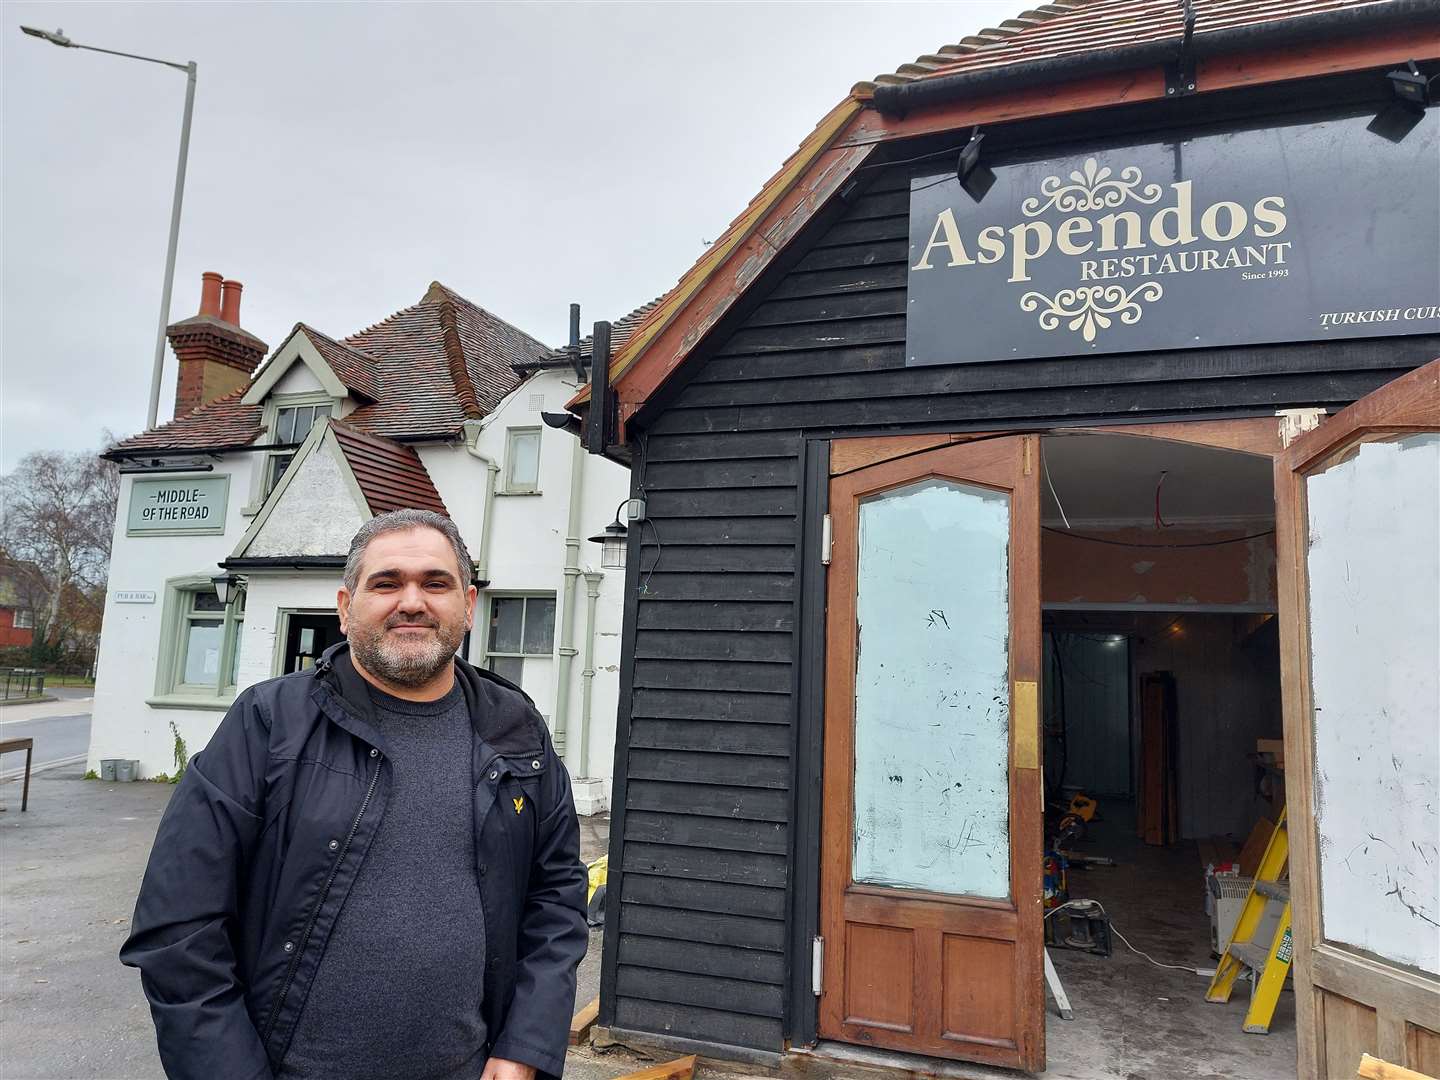 One of the owners of Aspendos, Nick Gunes, stood outside the former pub in Sturry, near Canterbury